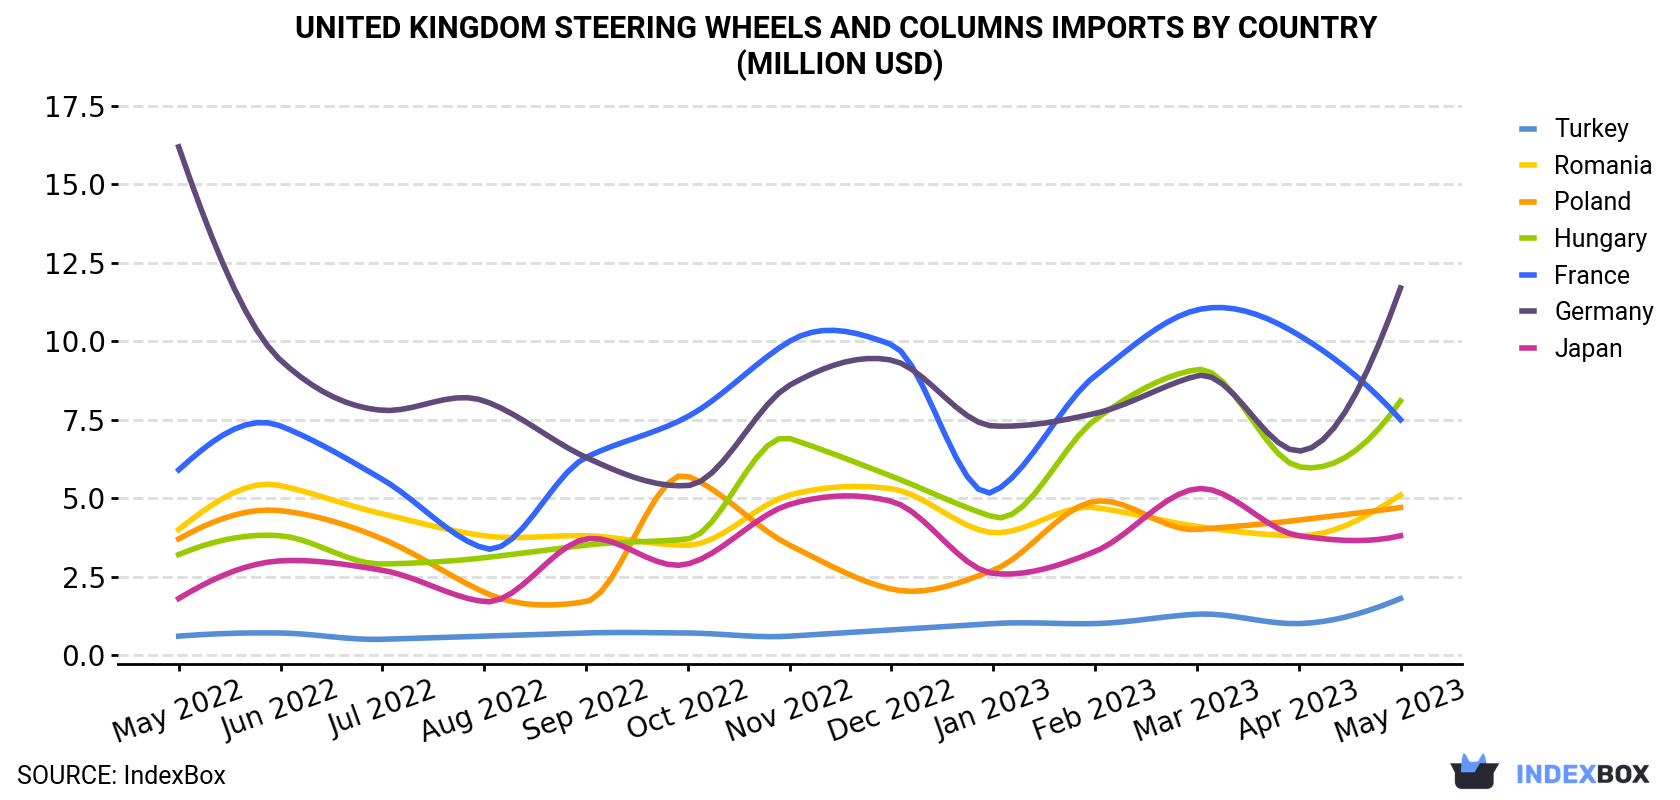 United Kingdom Steering Wheels And Columns Imports By Country (Million USD)